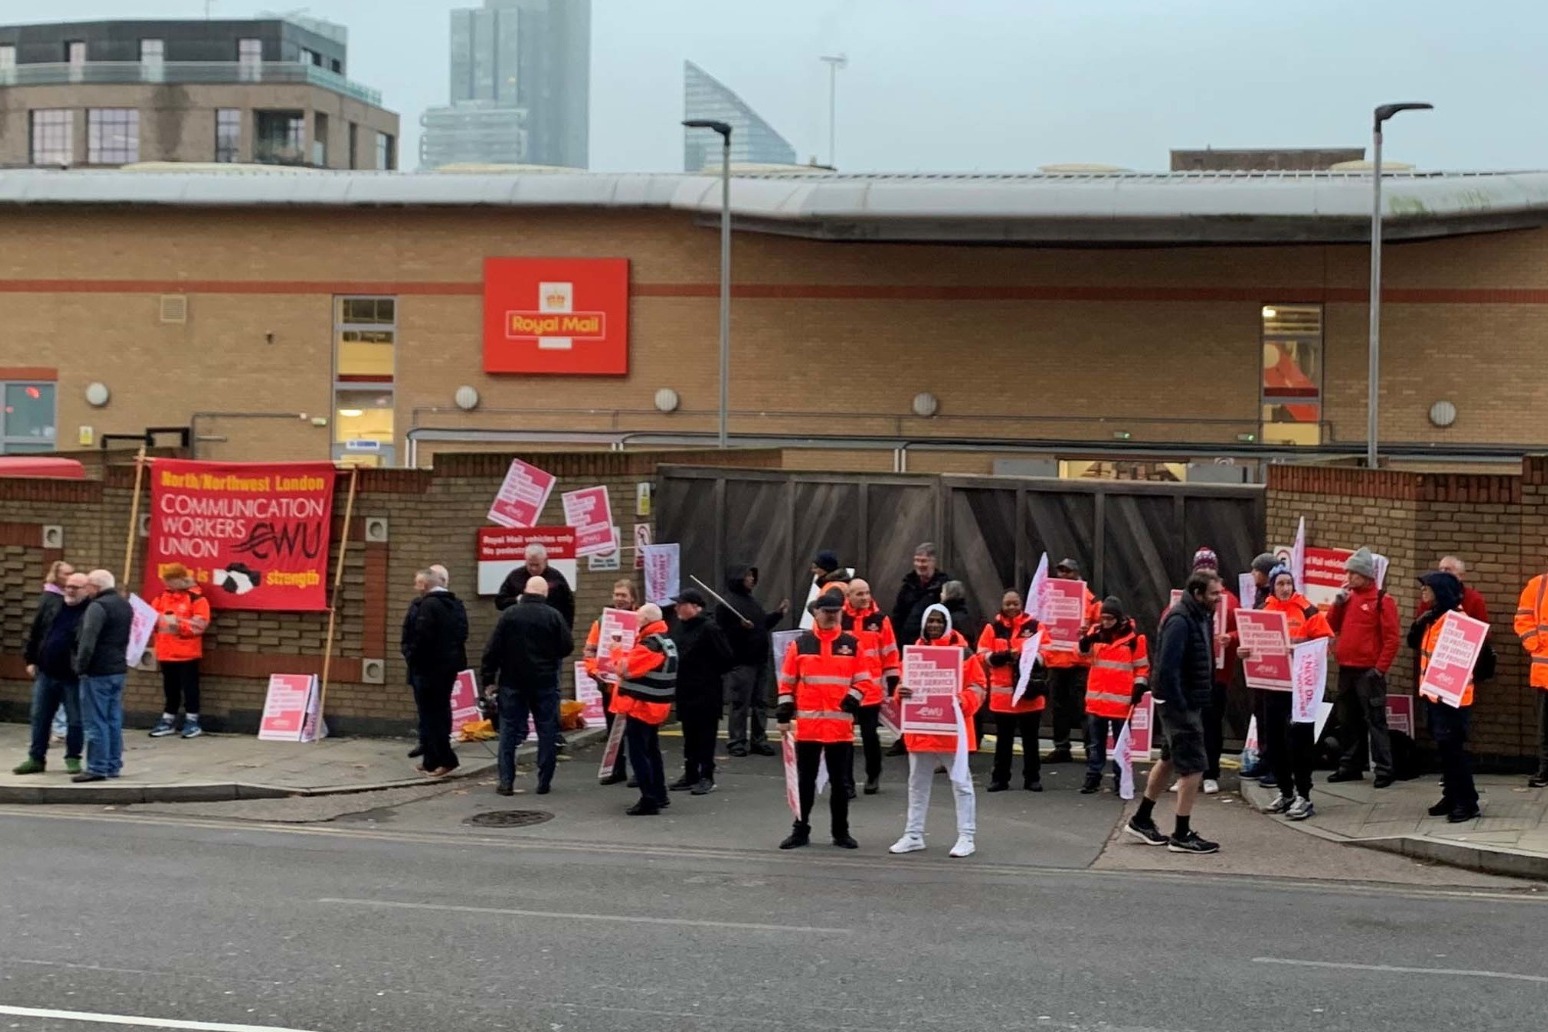 Thousands of striking Royal Mail workers expected at rally near Parliament 